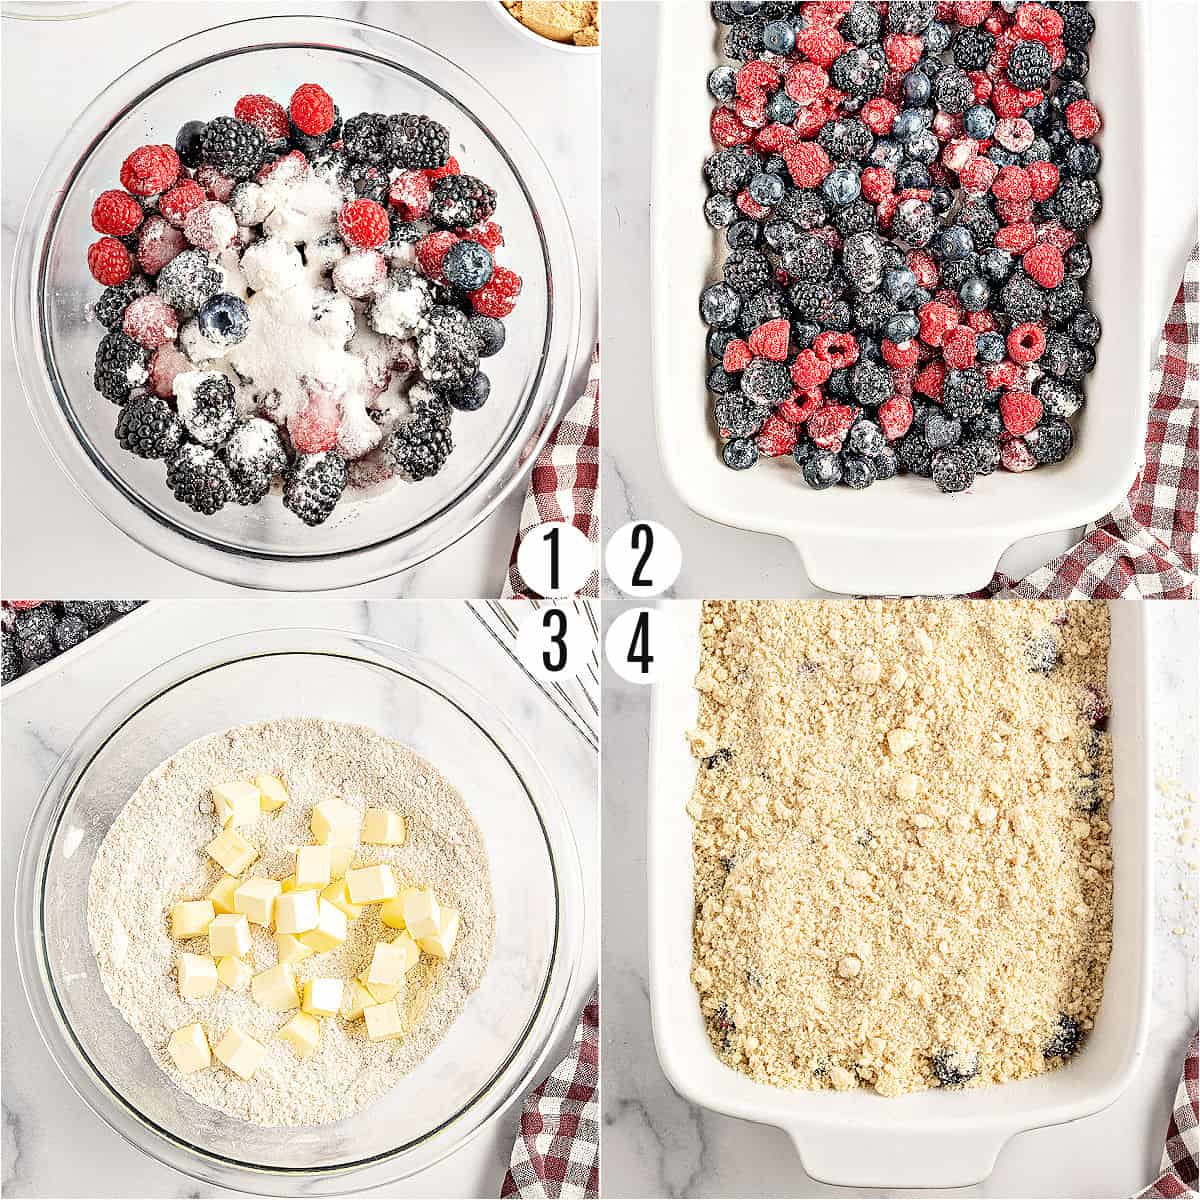 Step by step photos showing how to make berry crumble.